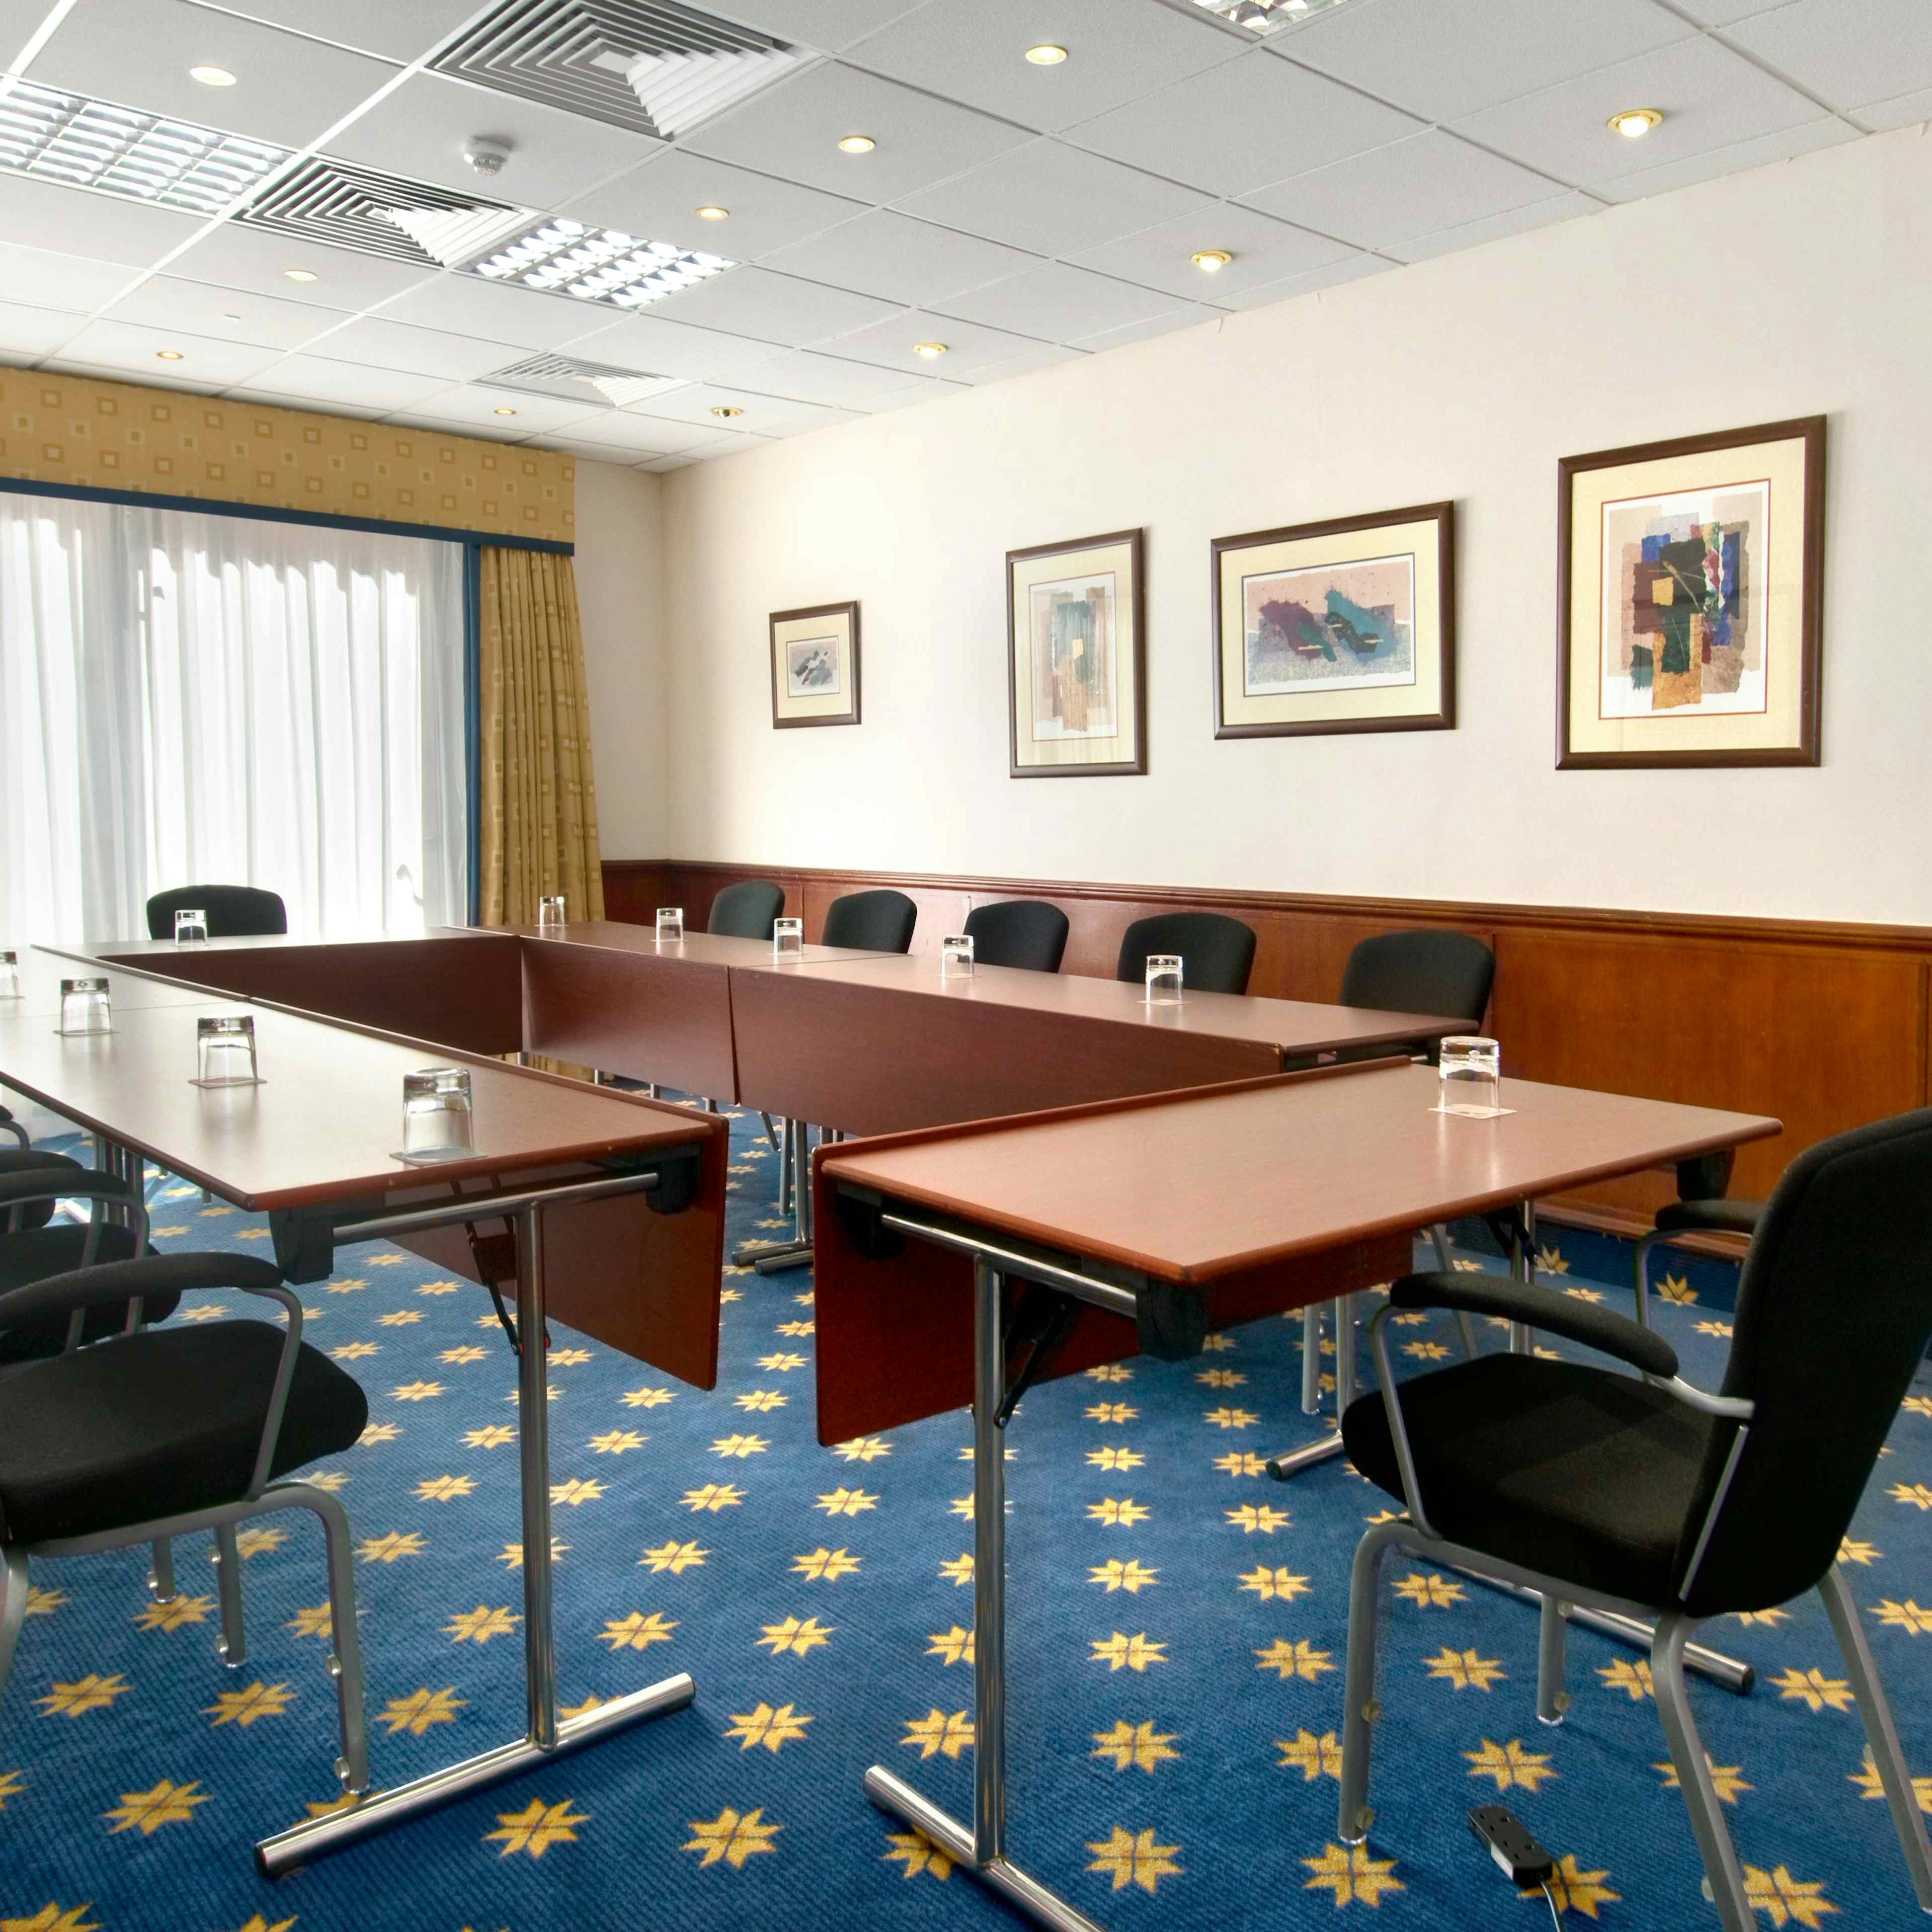 Hilton, Manchester Airport - Shannon Boardroom image 1